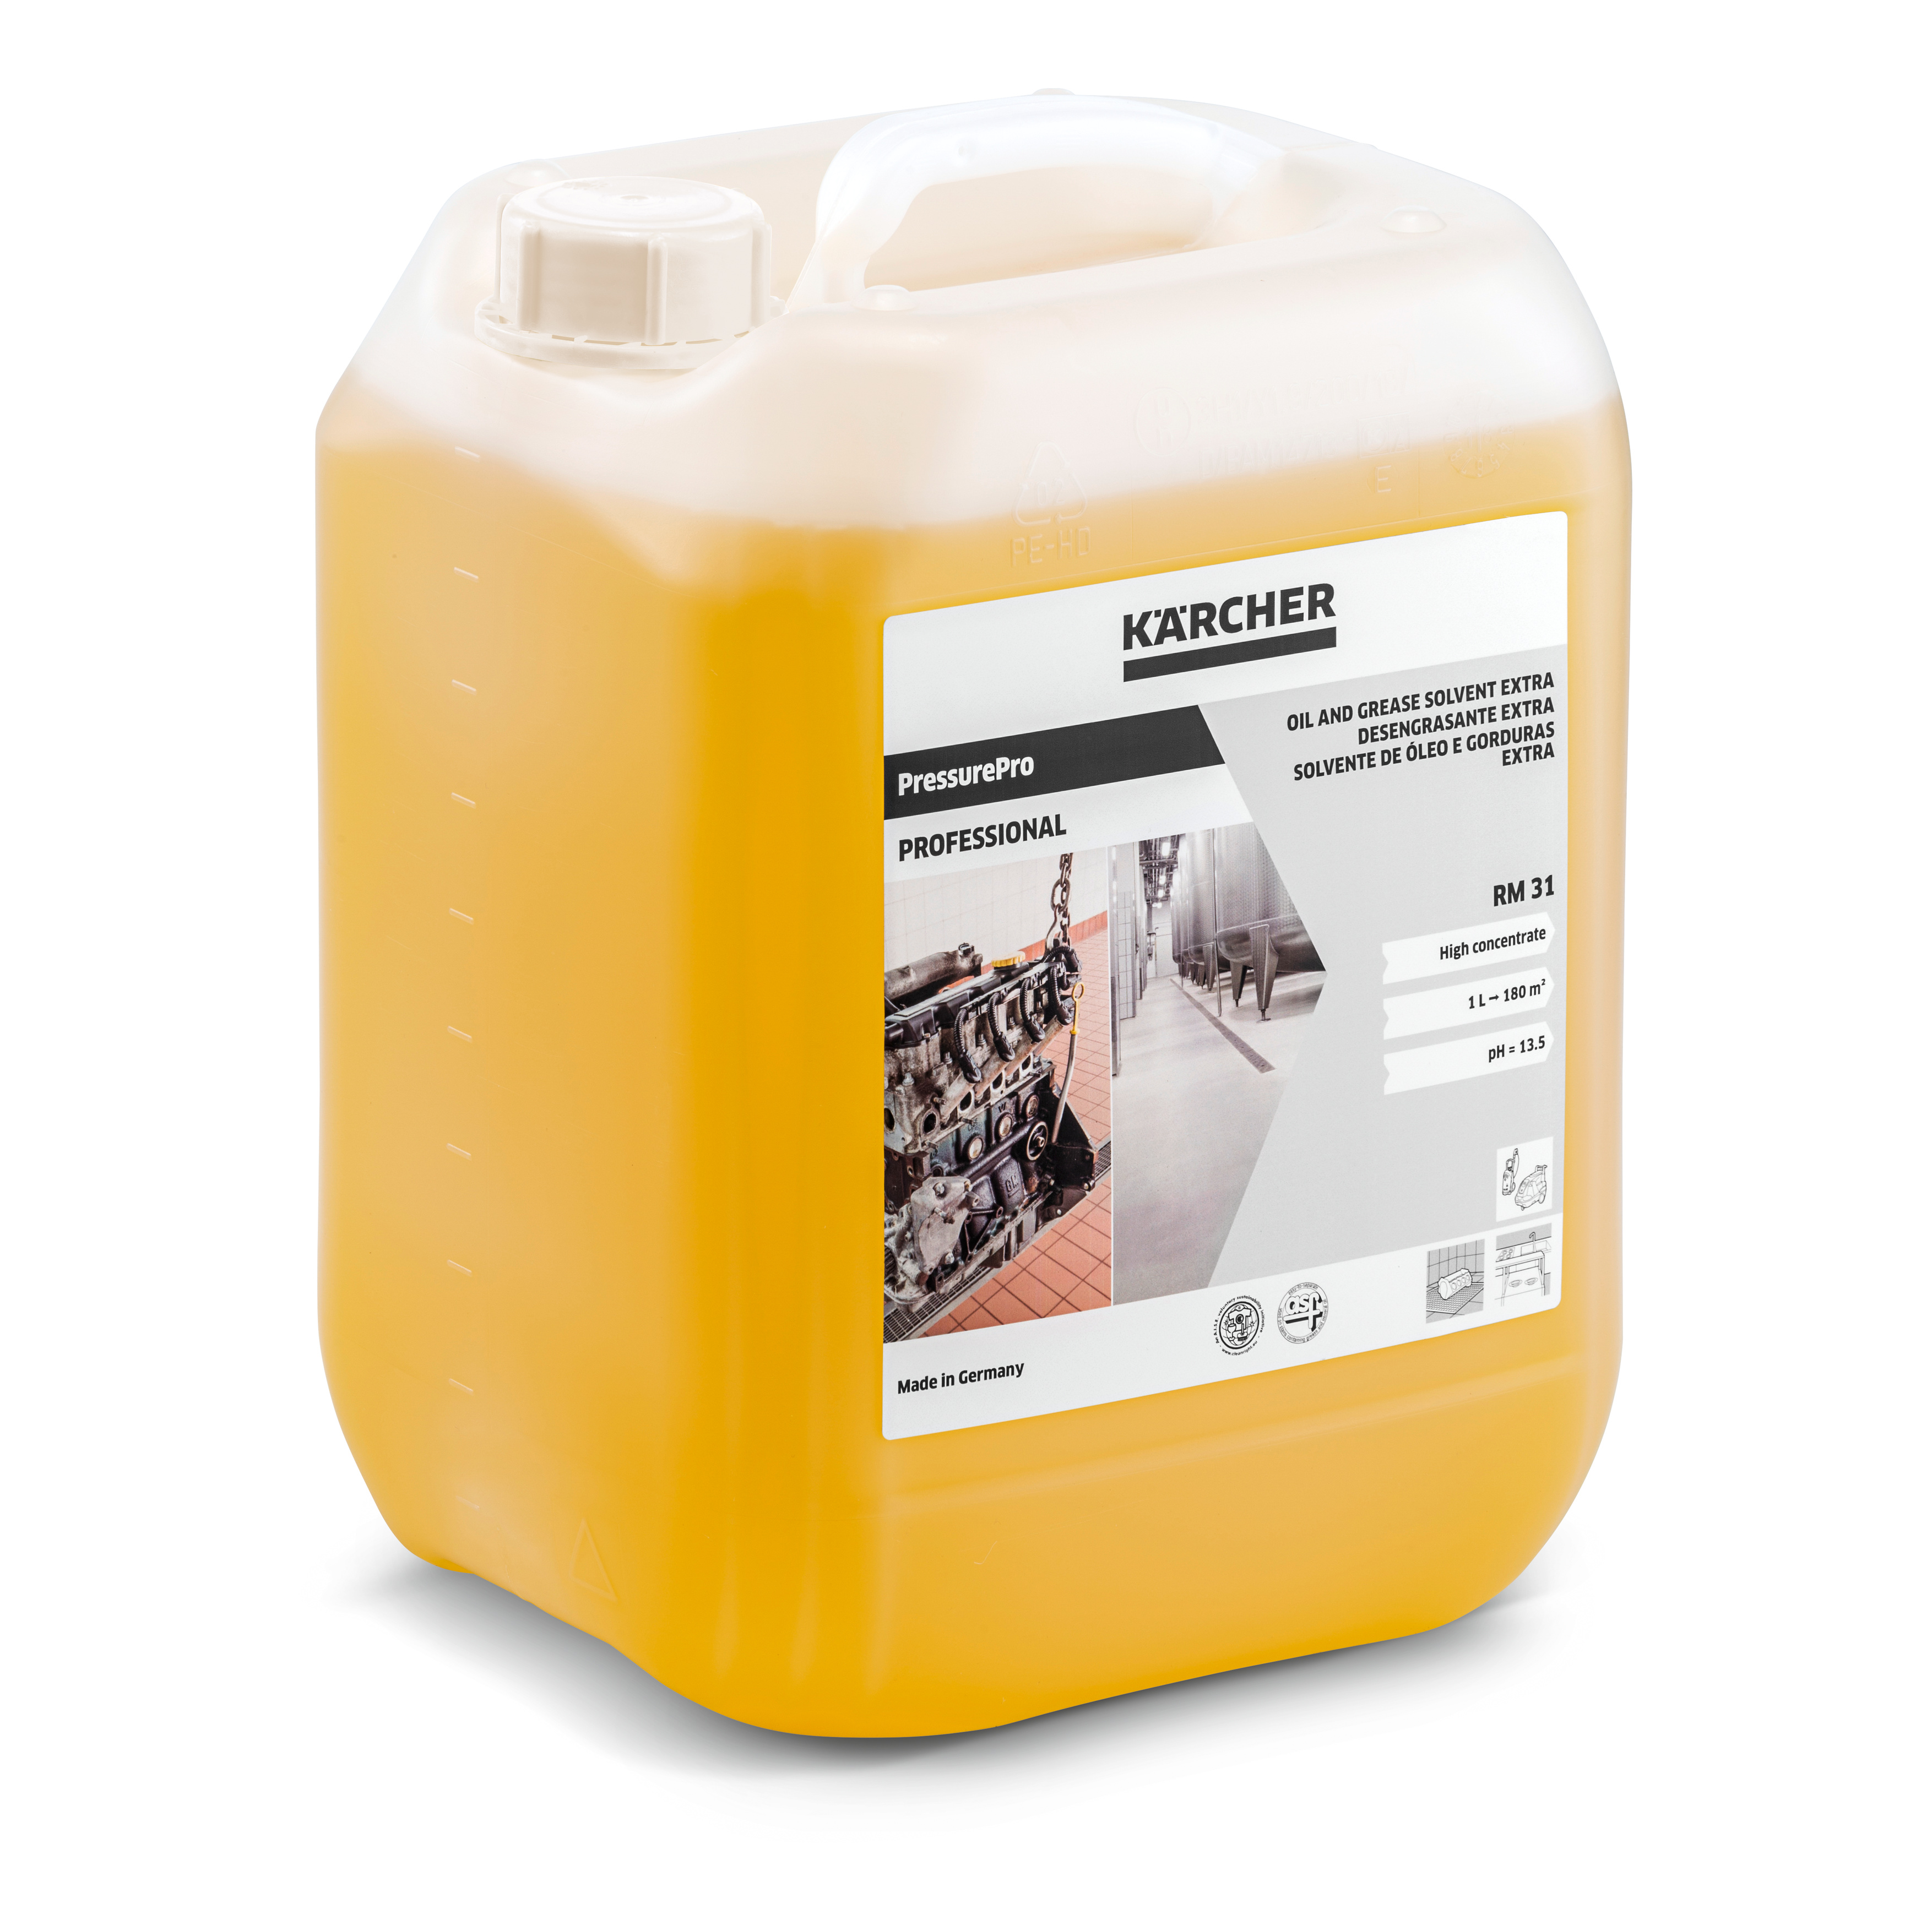 PressurePro Oil and Grease Cleaner Extra RM 31, 10l Karcher